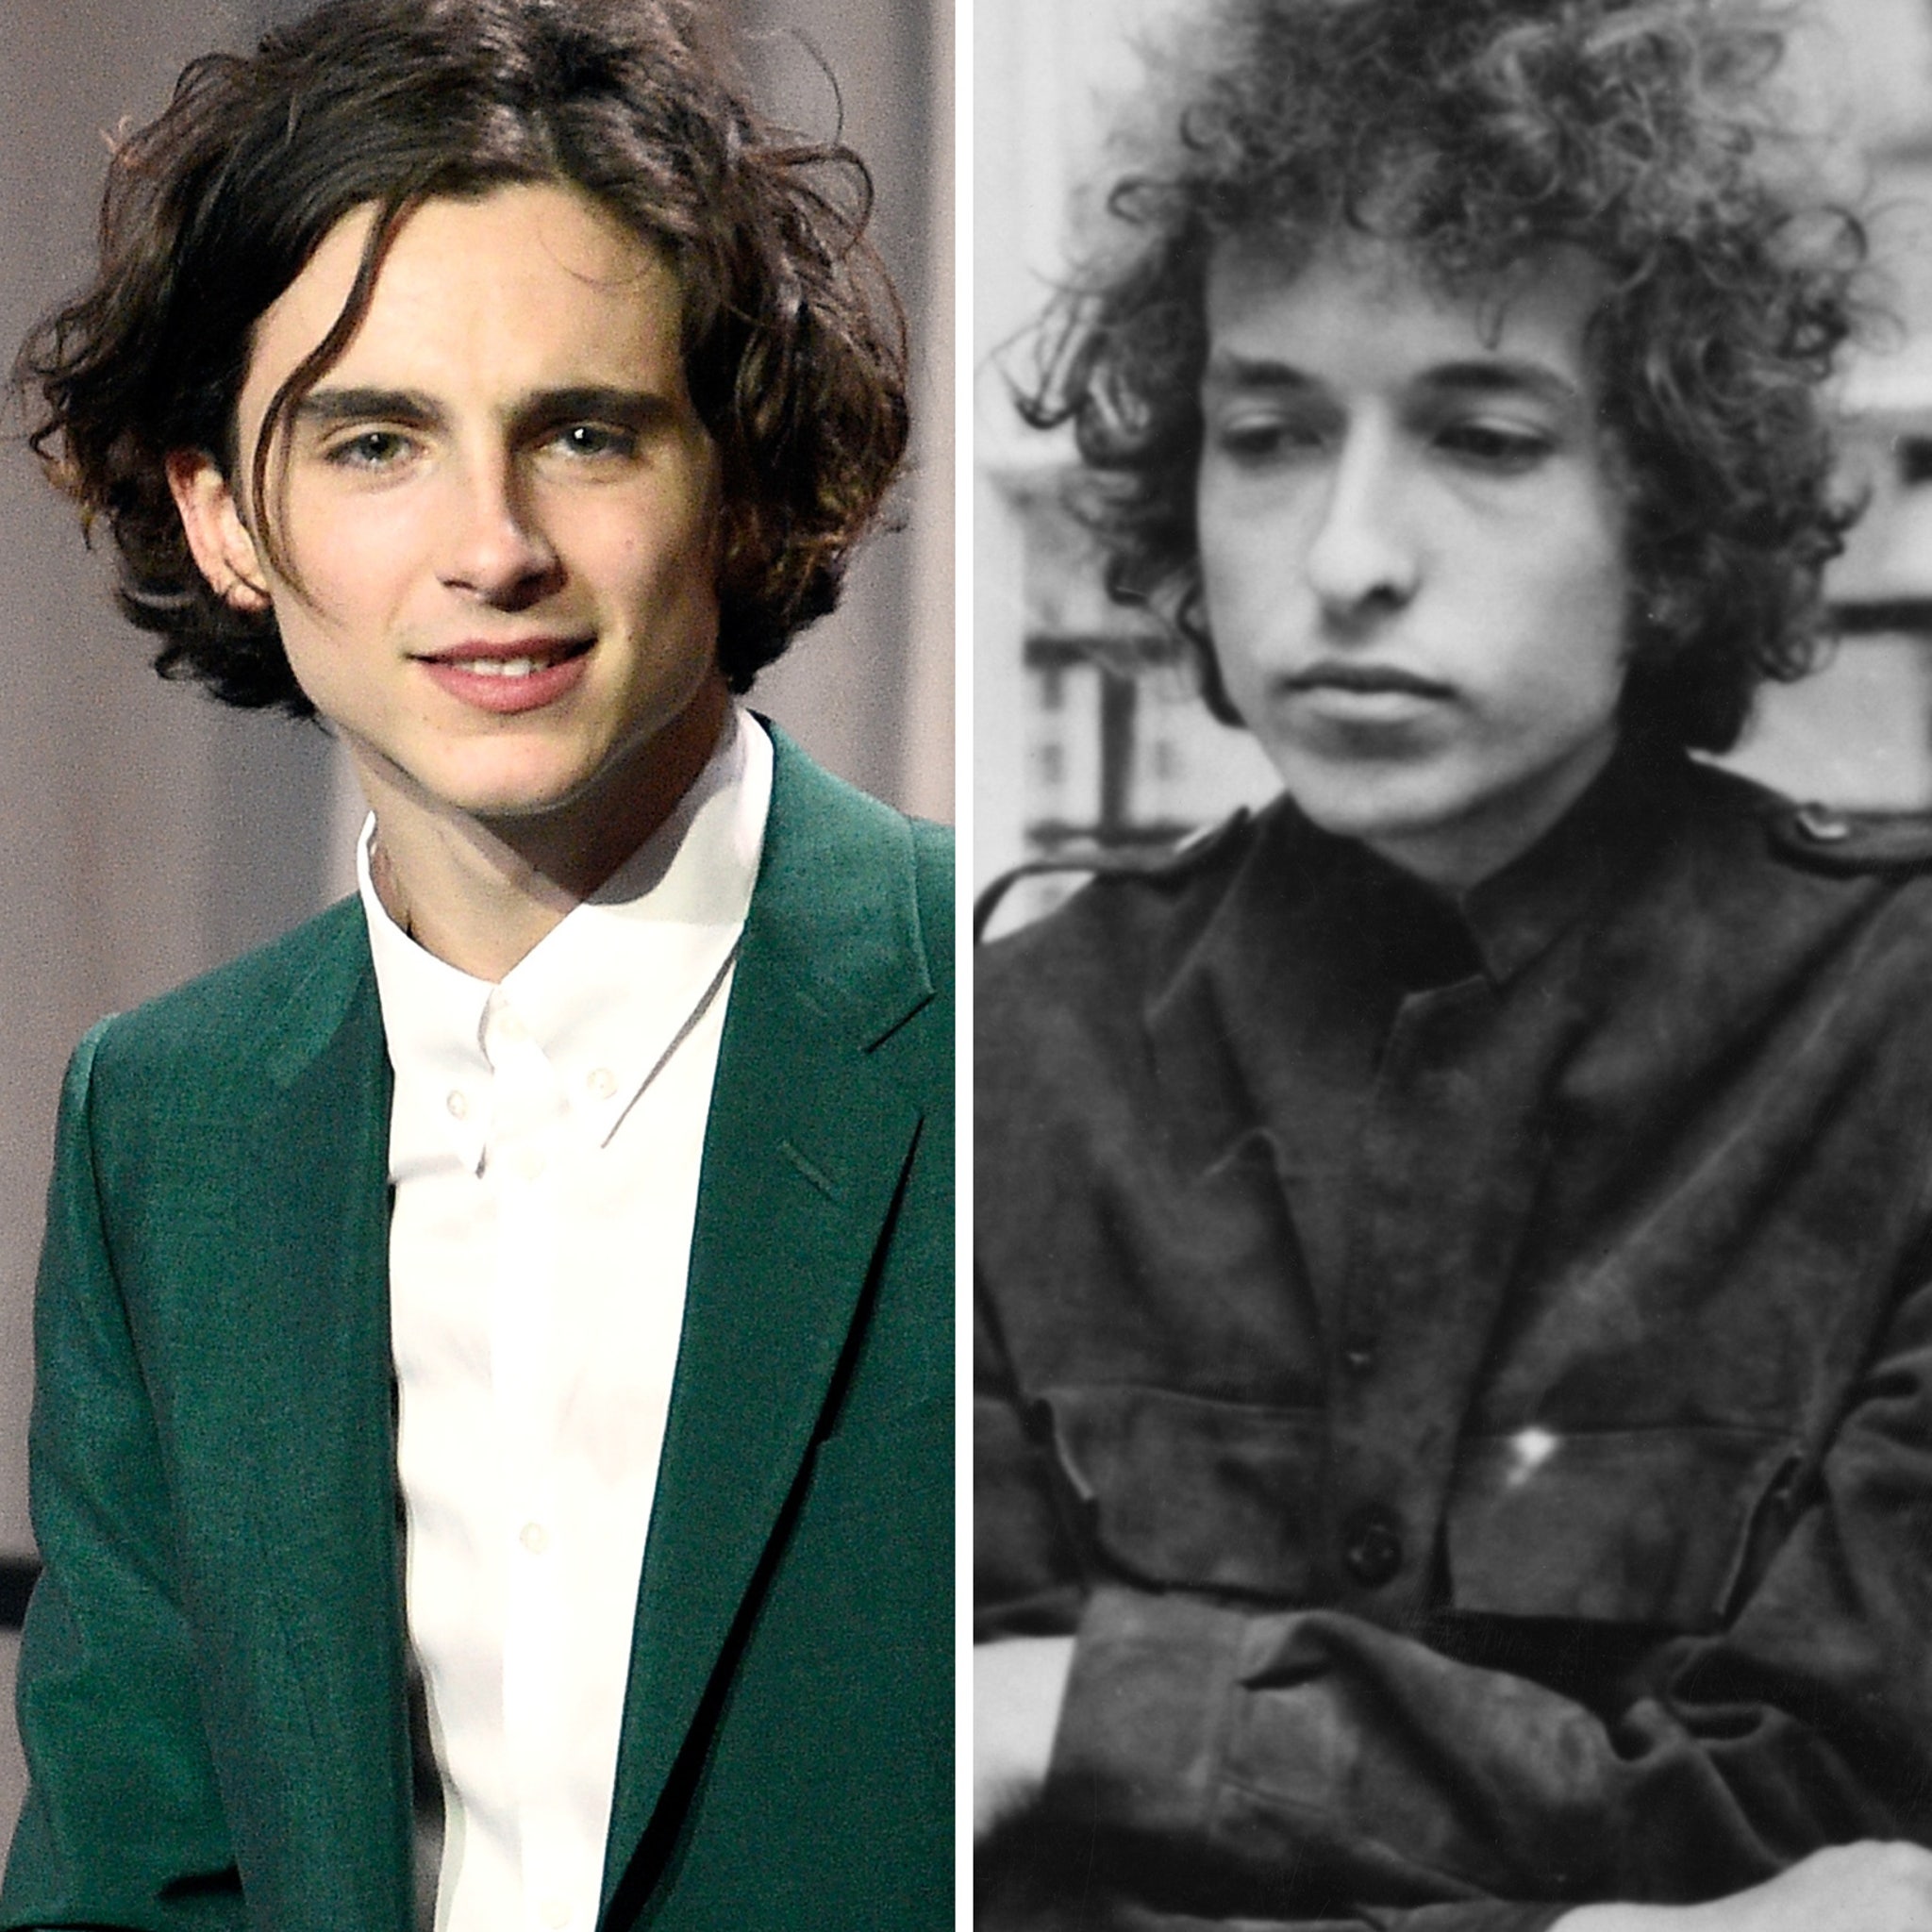 Timothee Chalamet In Talks To Play Young Bob Dylan In Biopic